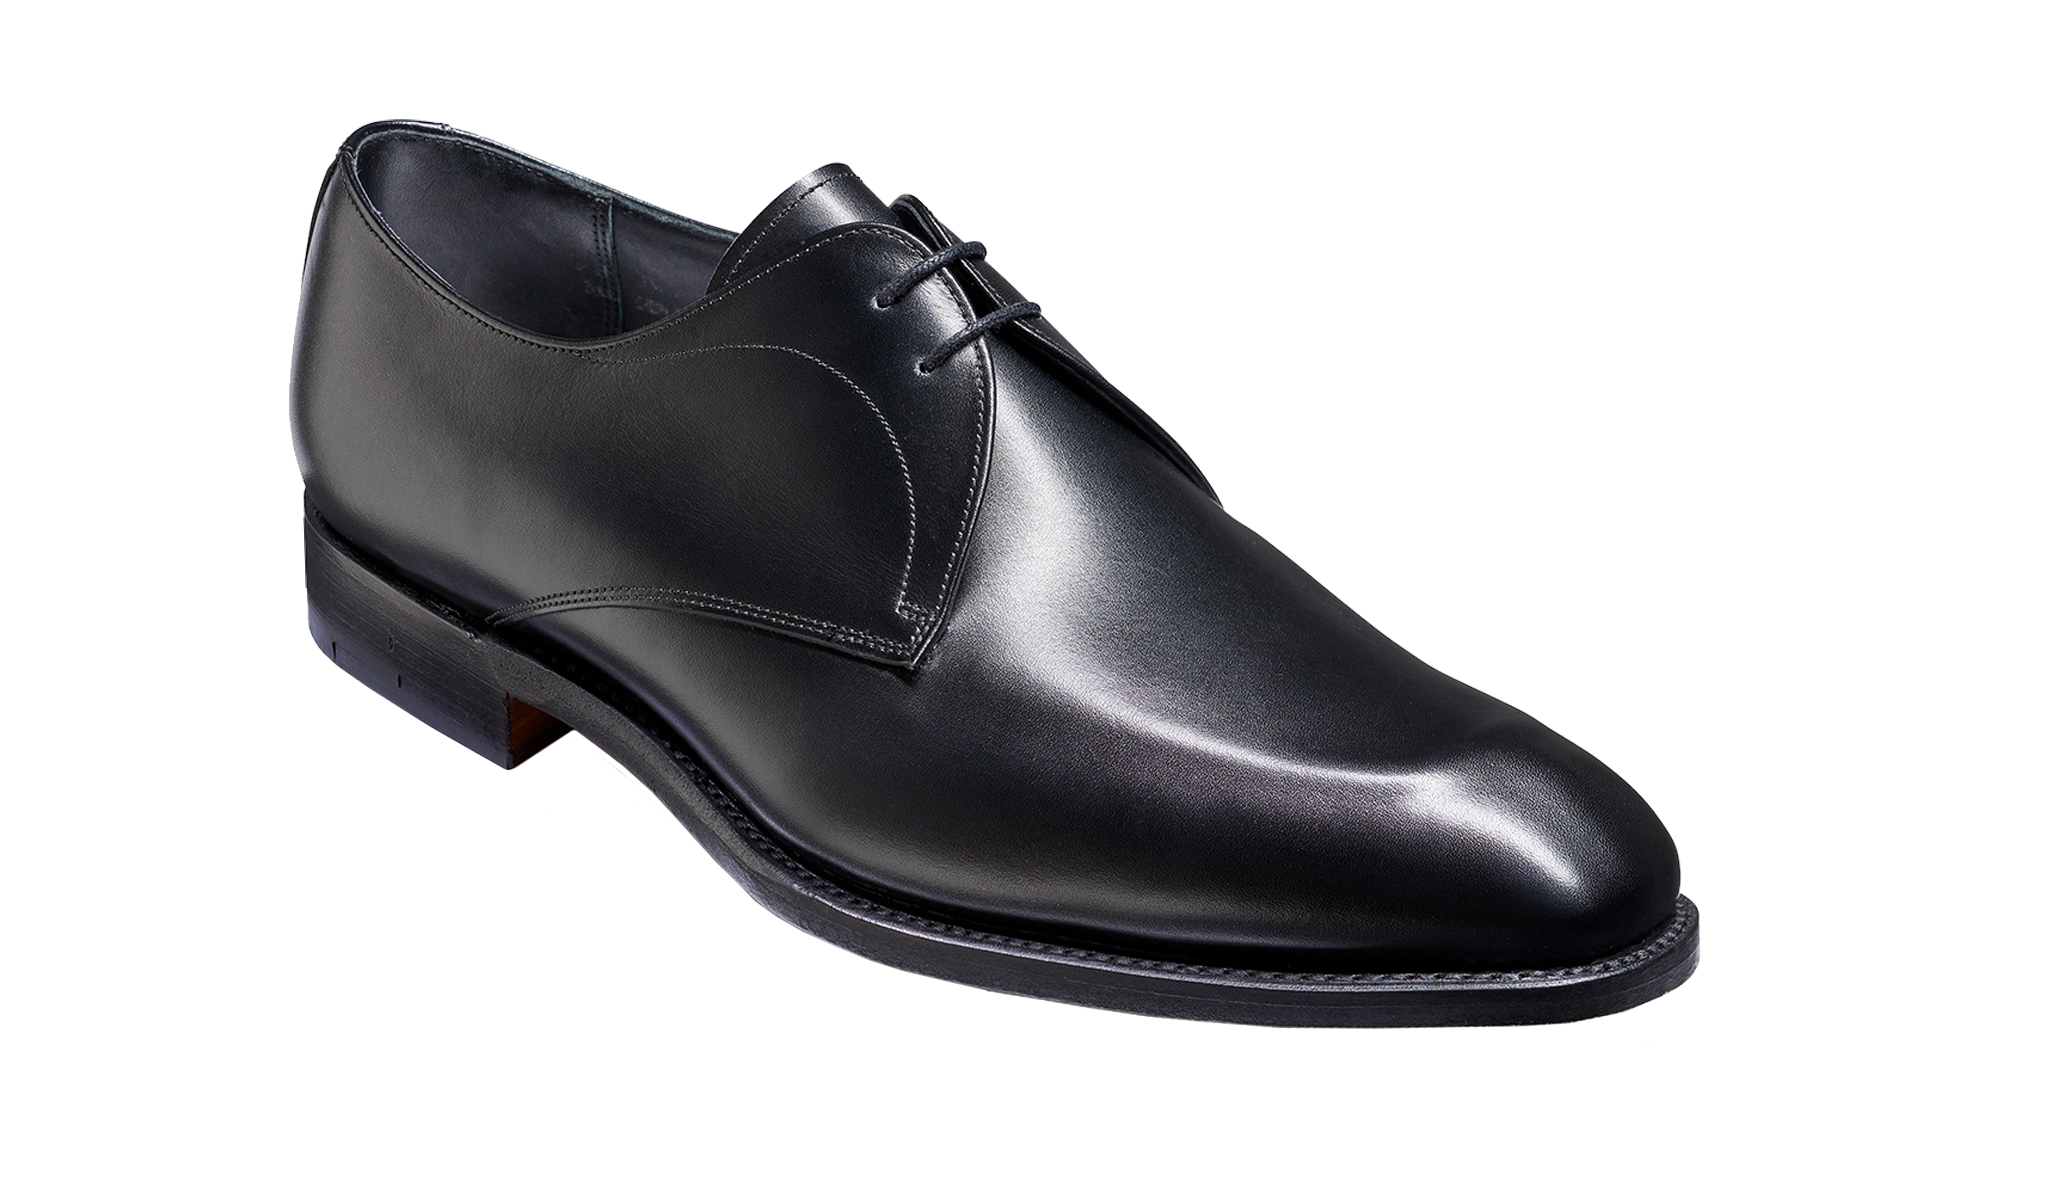 Purley - A men's black derby shoes by Barker Shoes.